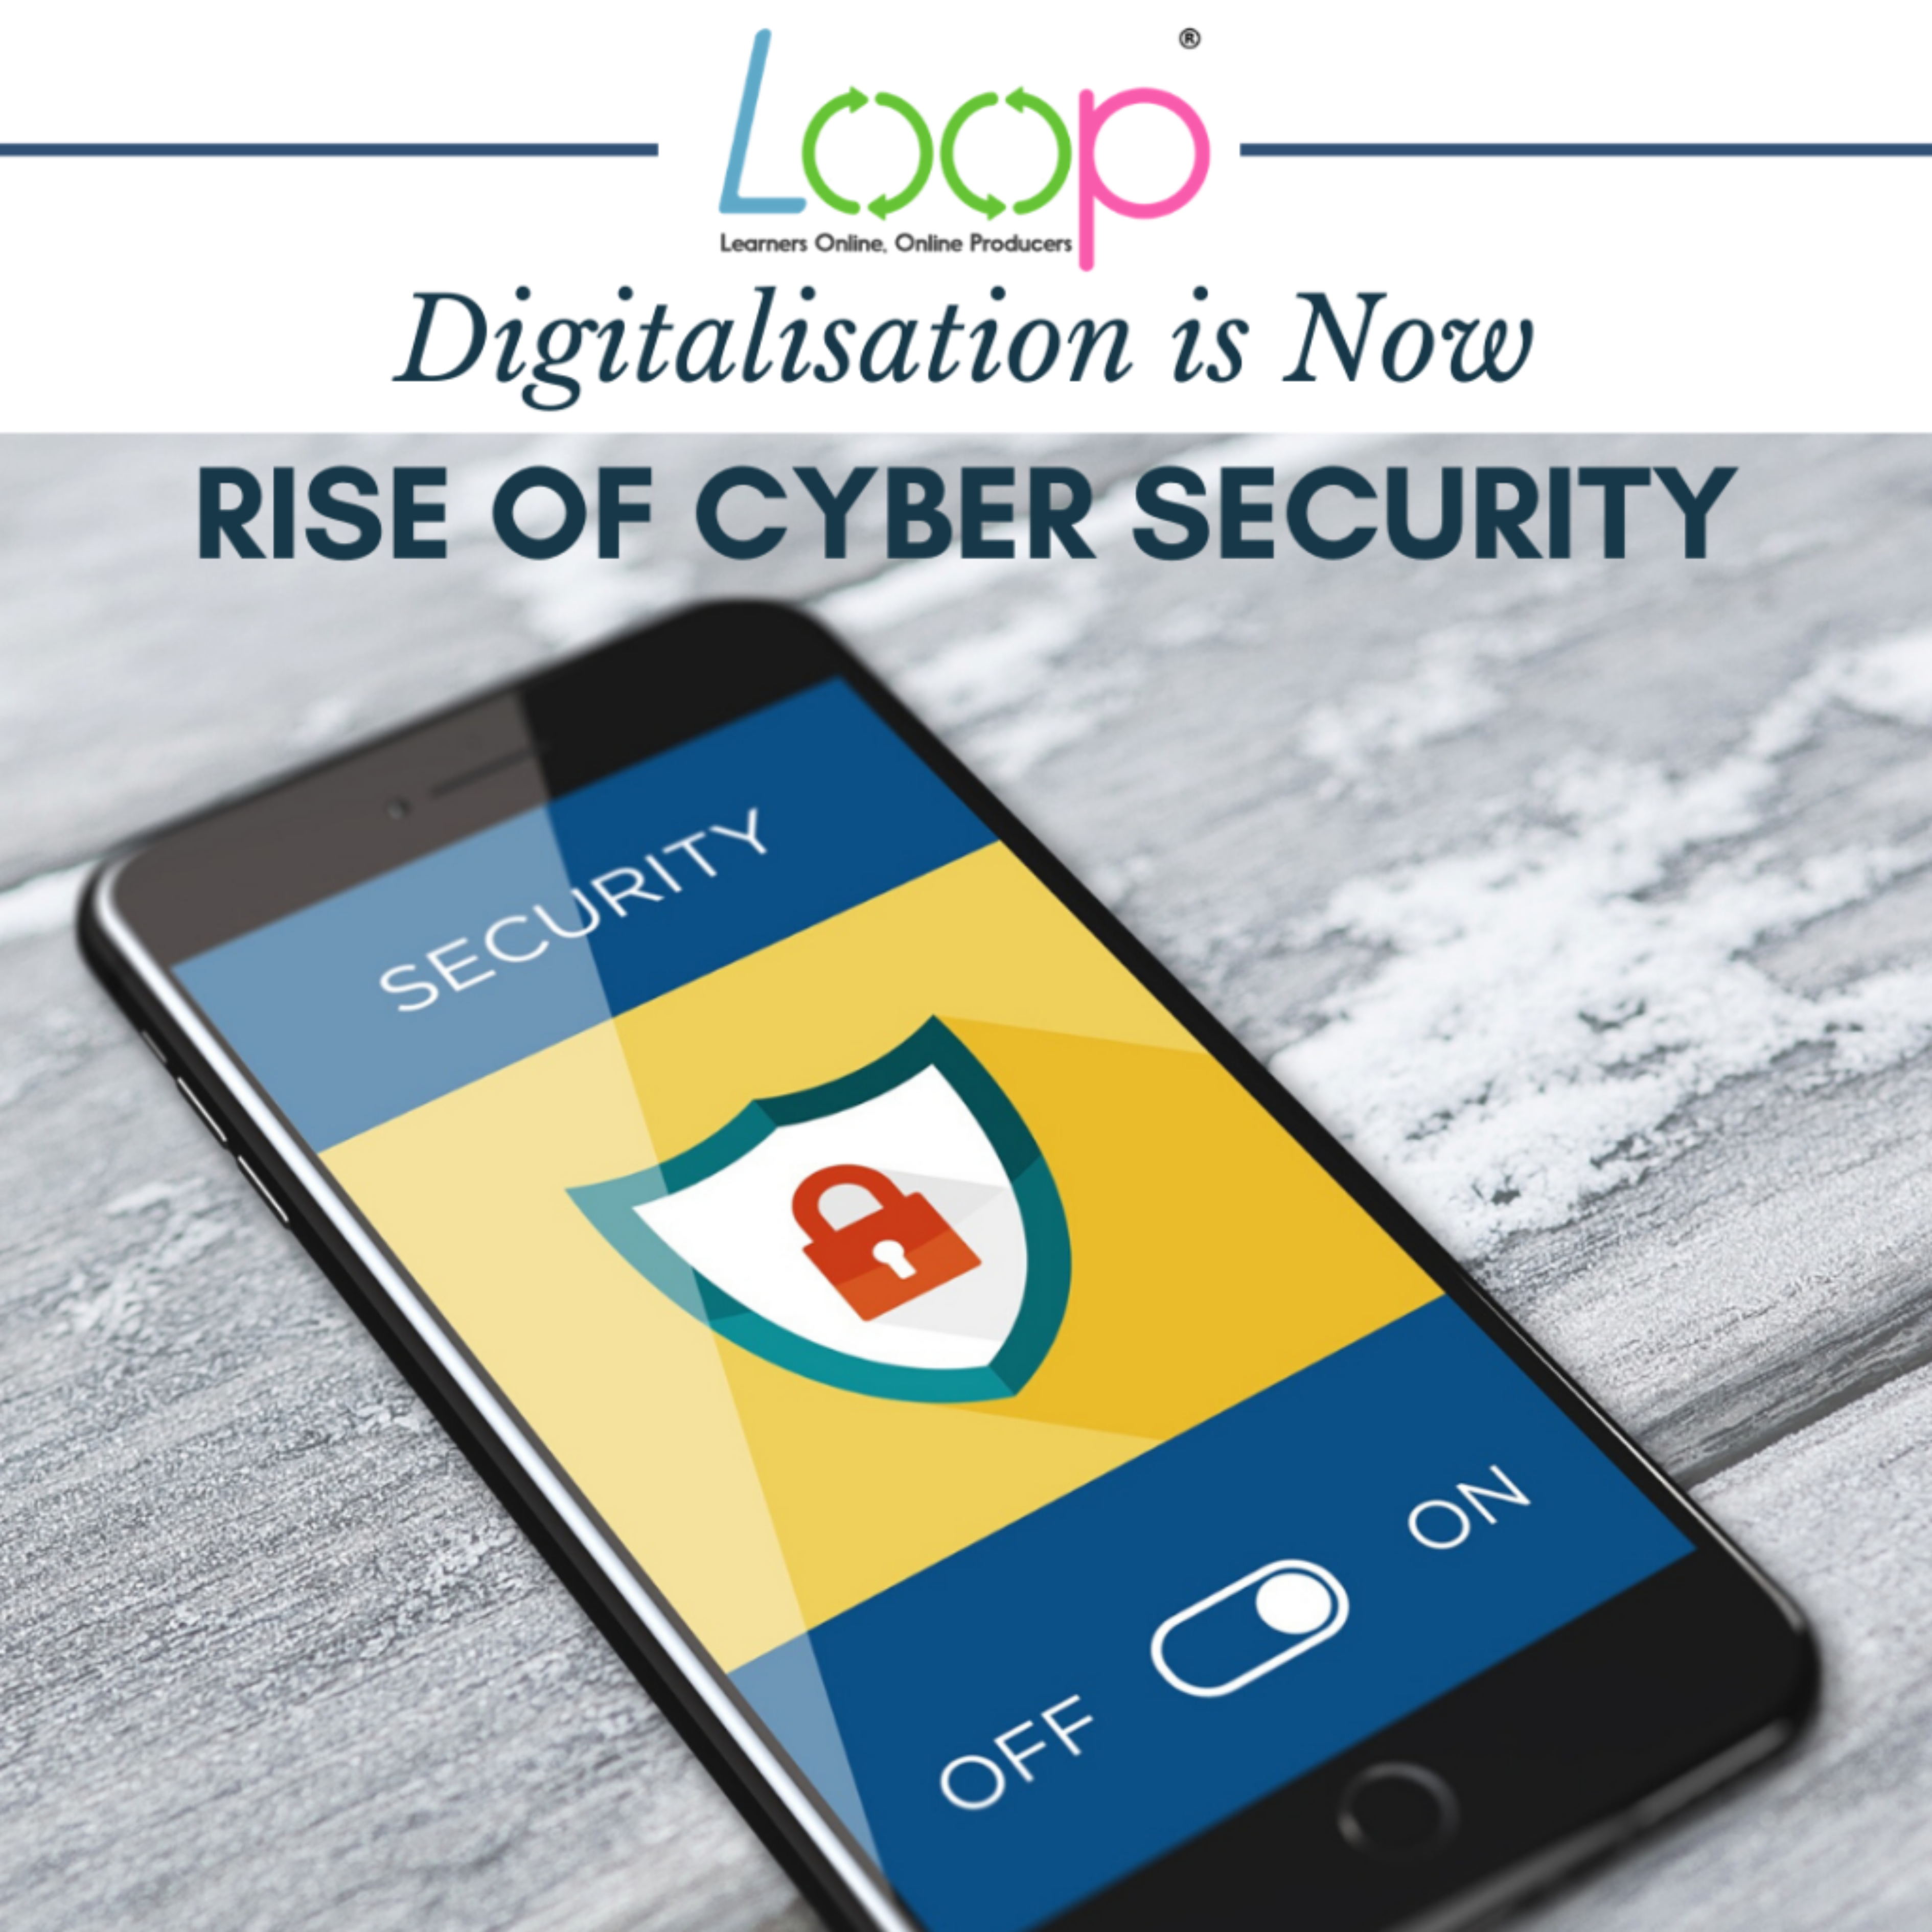 DIGITALISATION IS NOW, RISE OF CYBER SECURITY